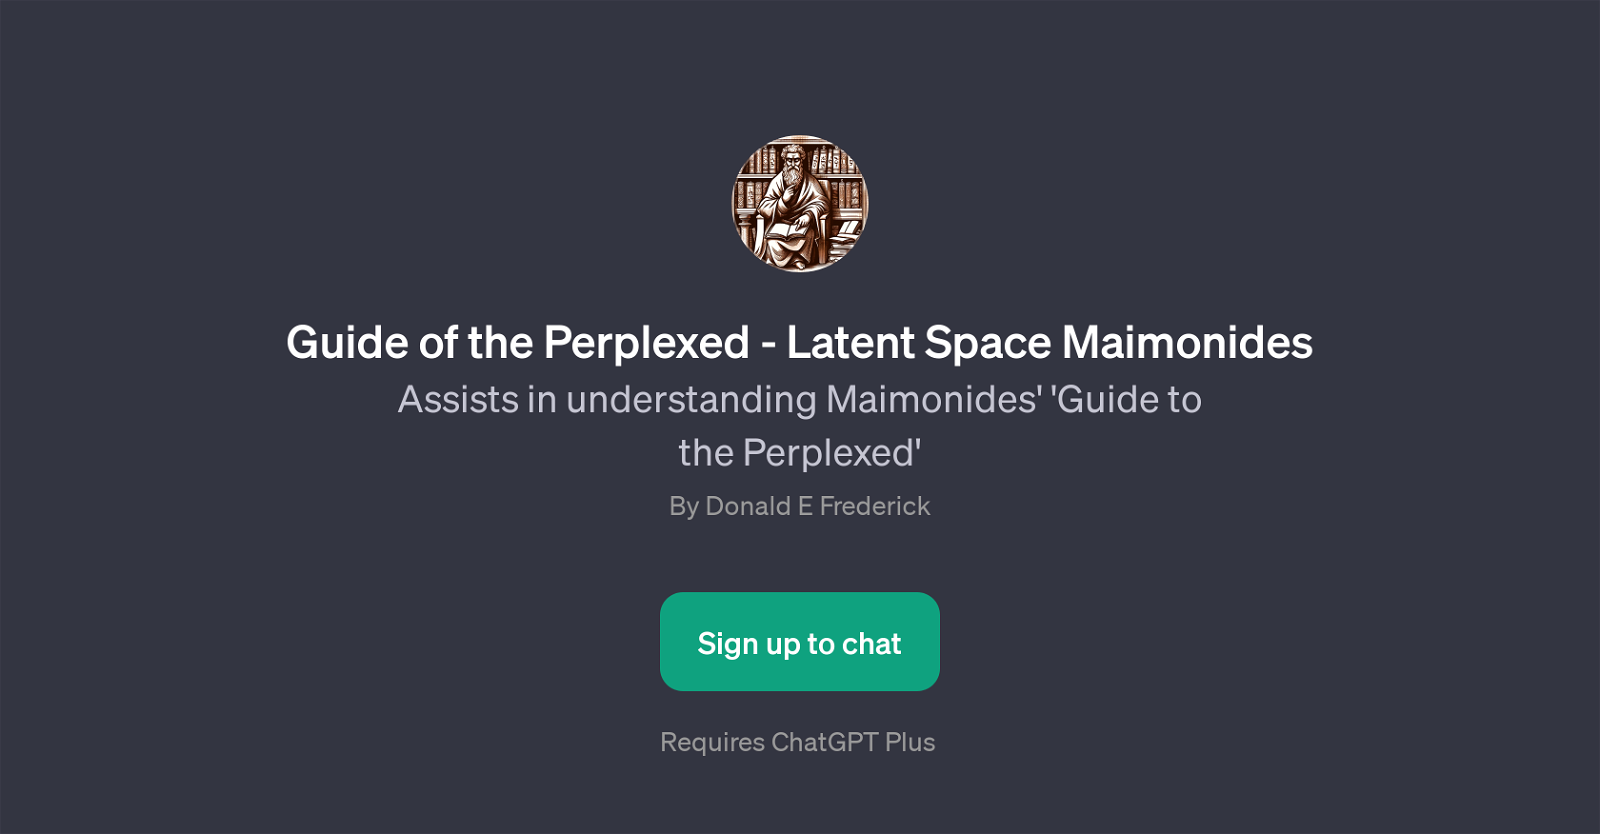 Guide of the Perplexed - Latent Space Maimonides website